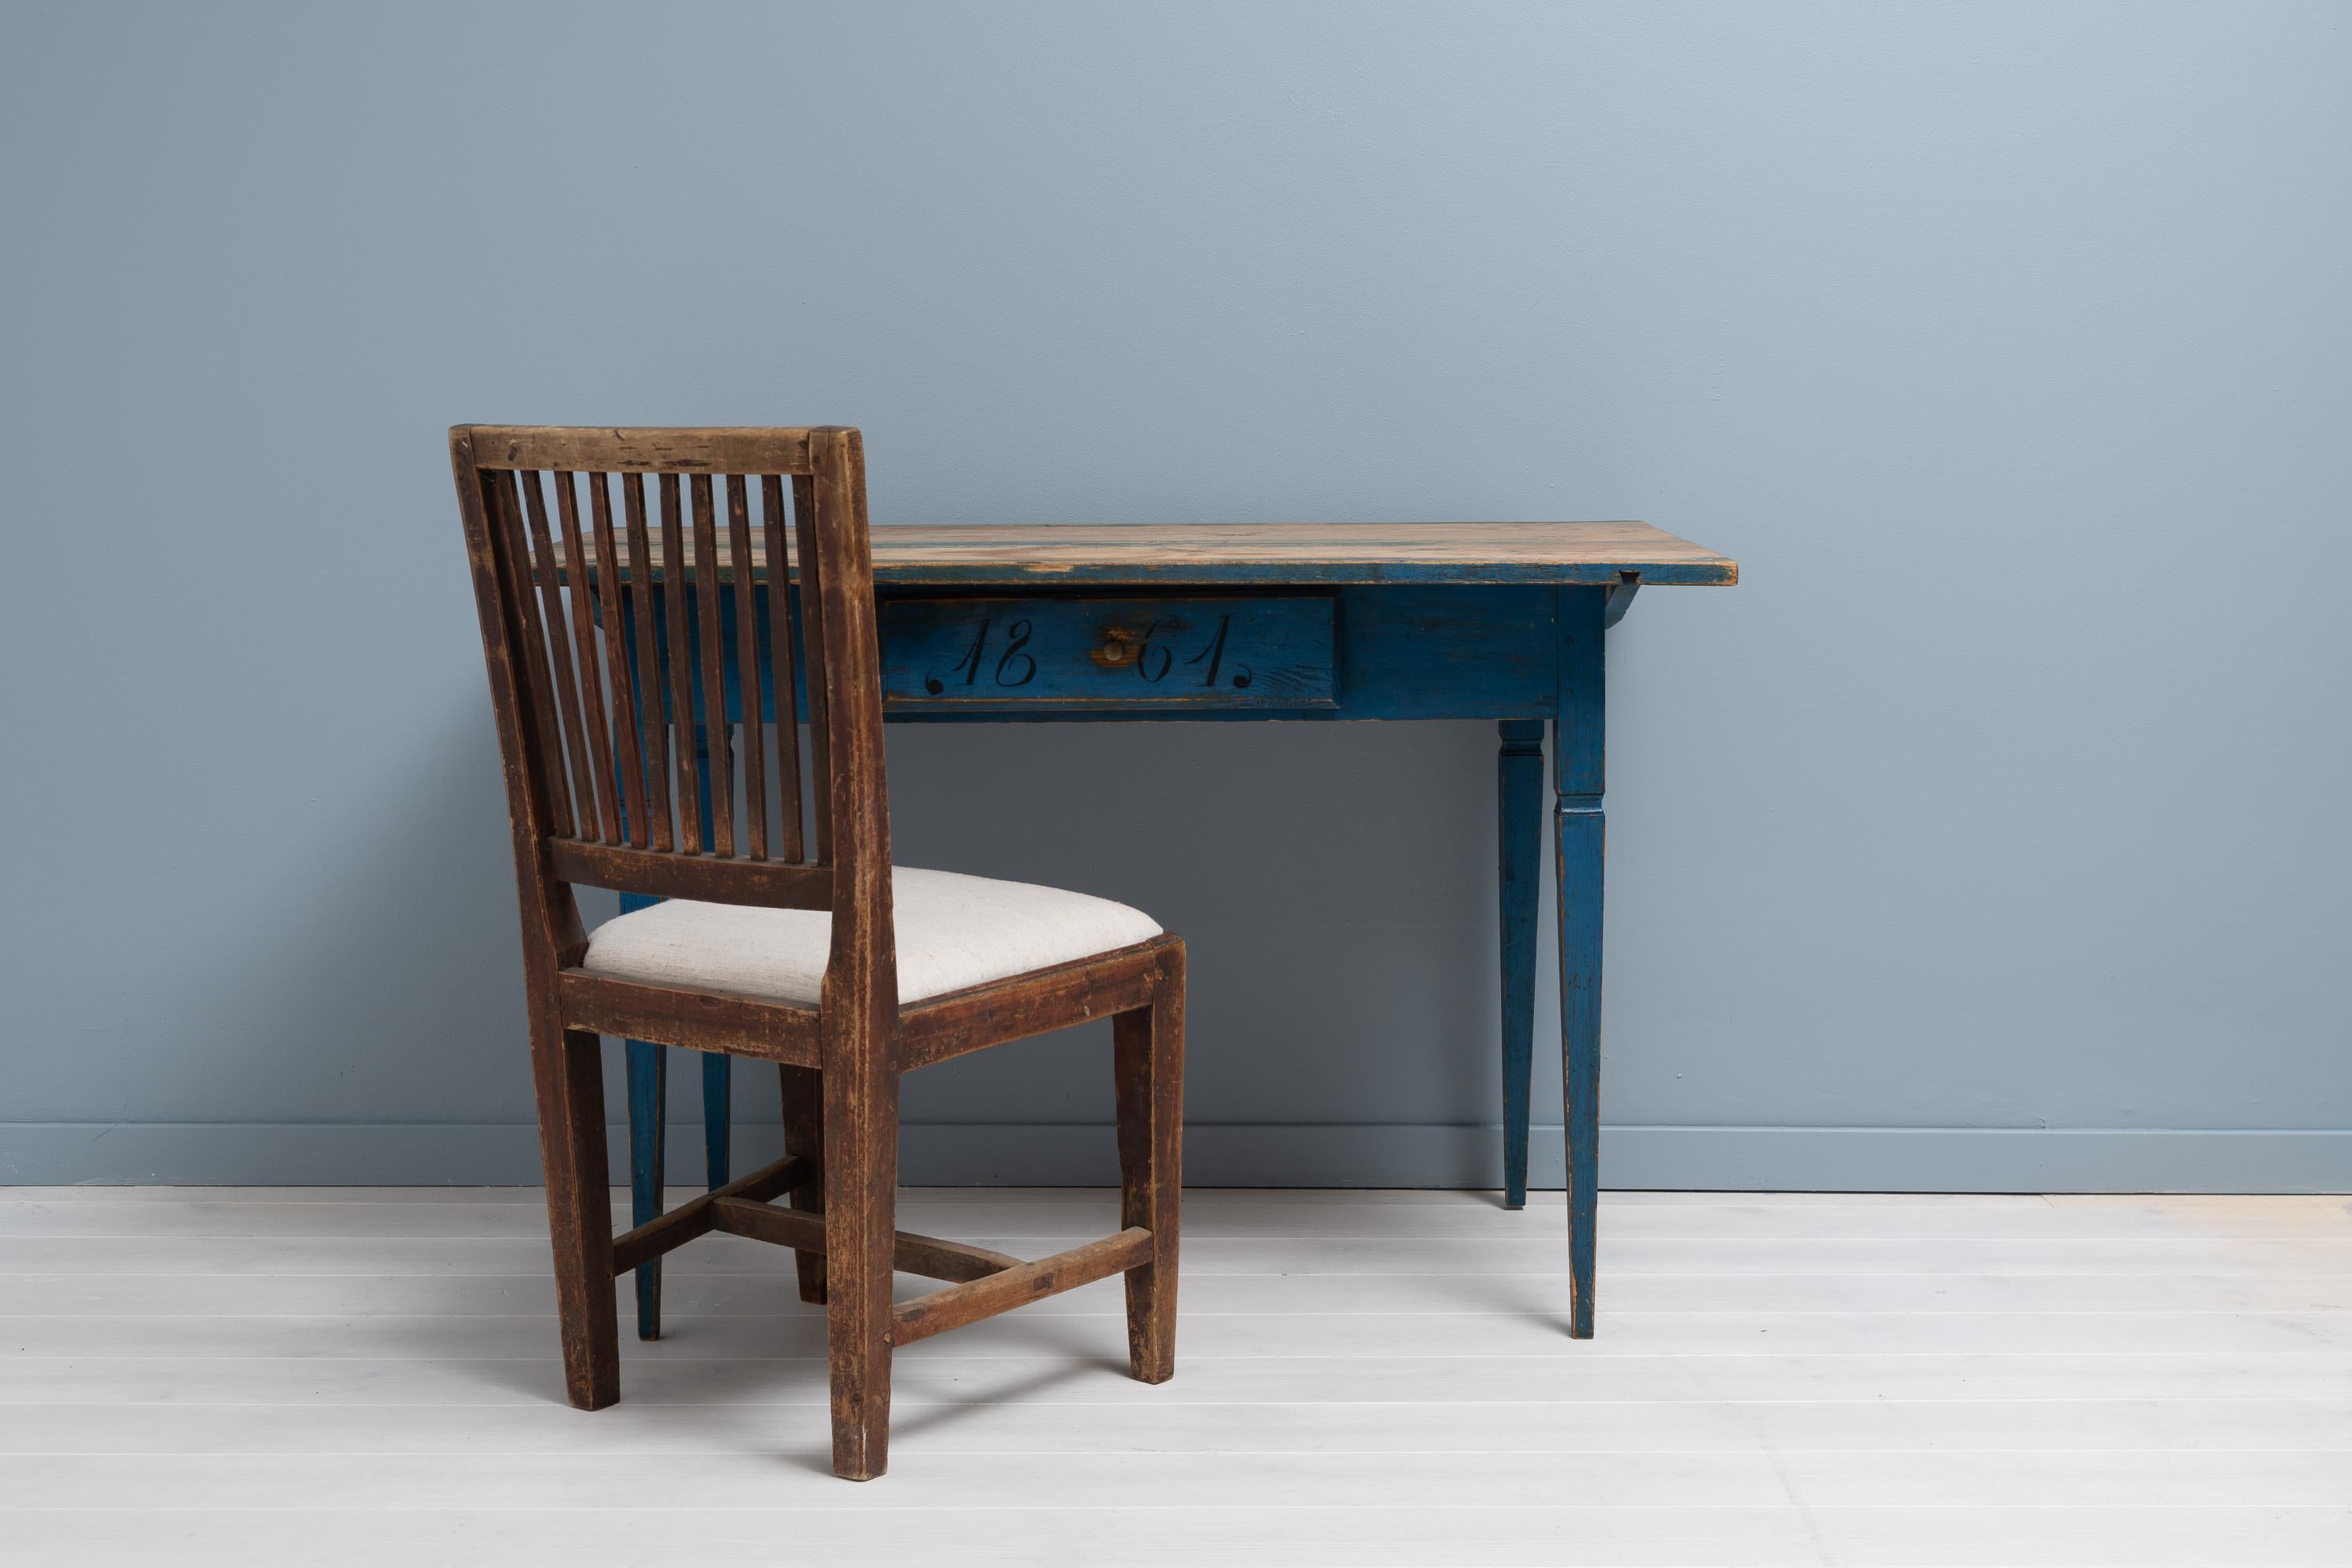 Hand-Crafted Genuine Antique Blue Swedish Gustavian Style Country Pine Desk Table For Sale